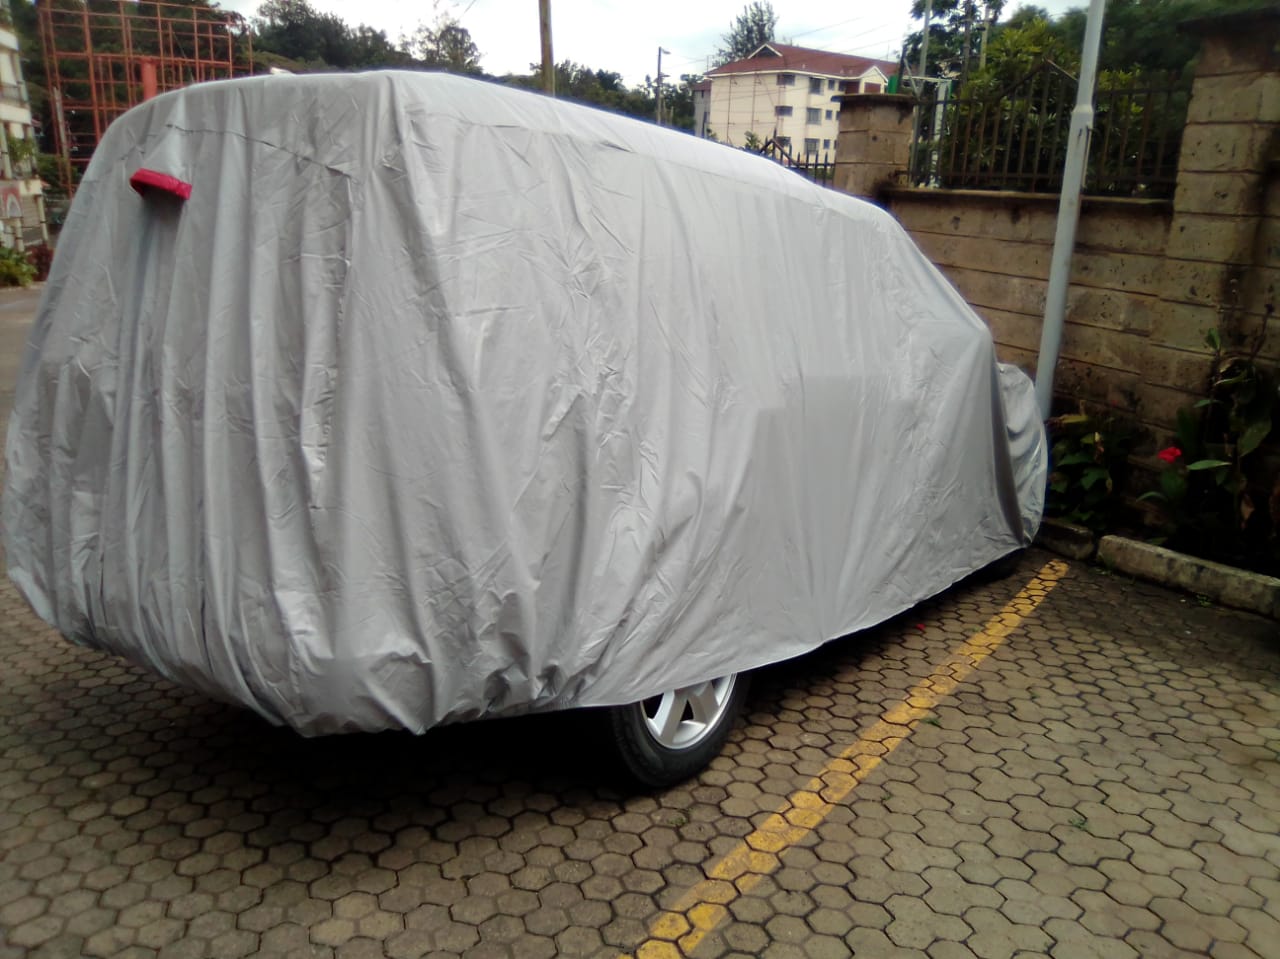 CAR COVER - SILVERMAX - VEHICLE MAINTENANCE - size SUV H